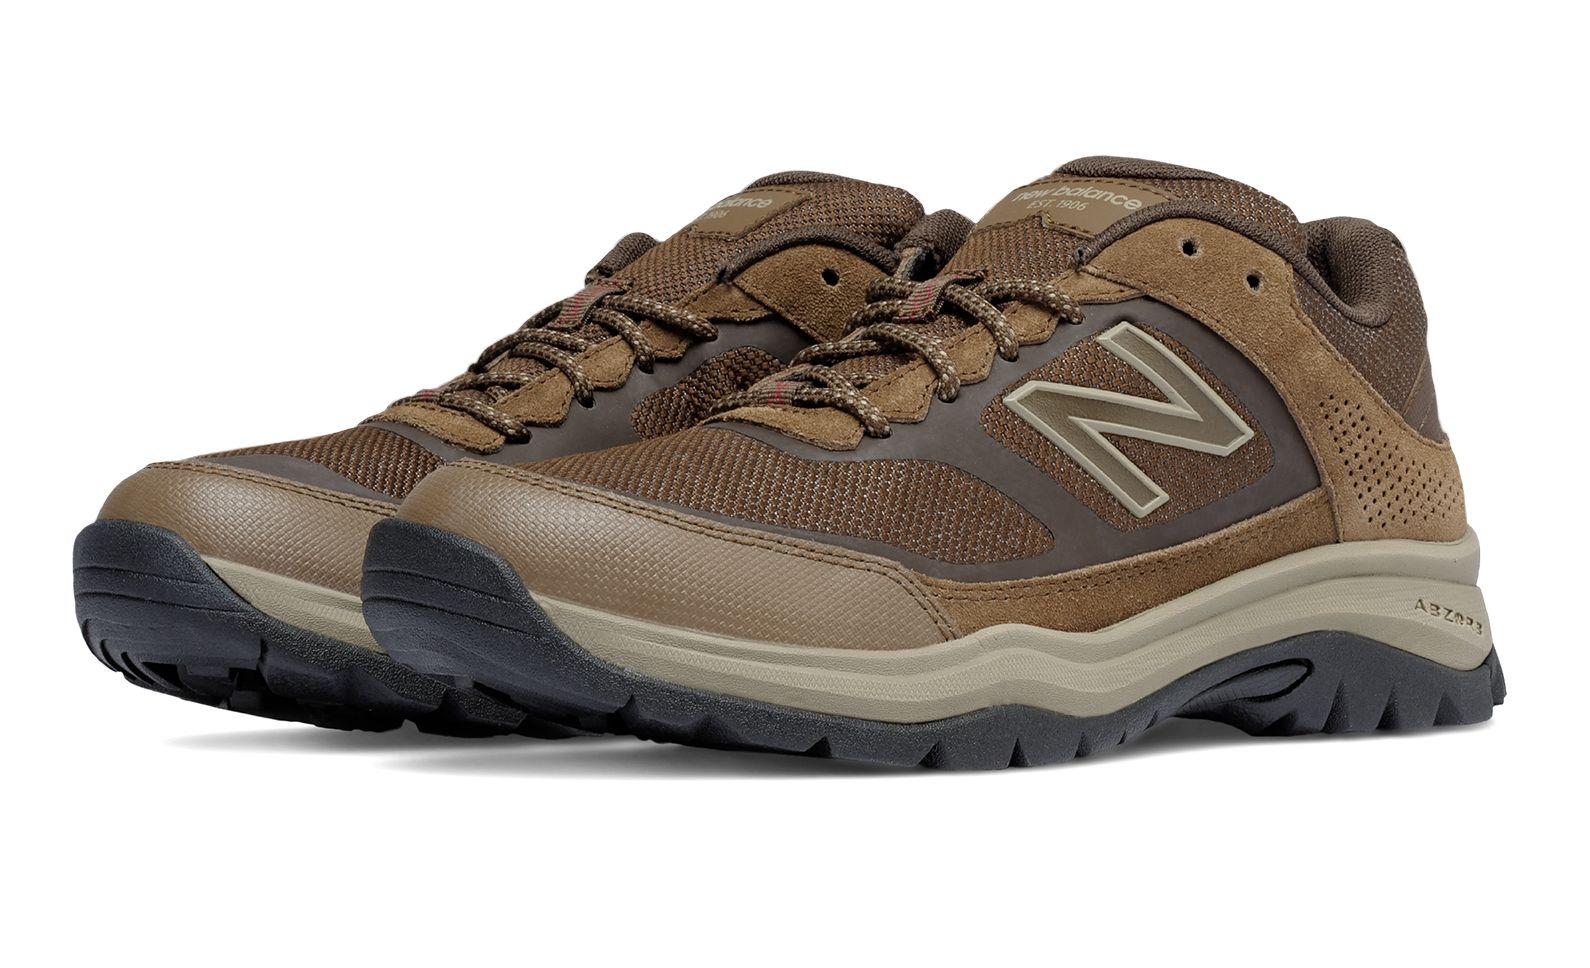 New Balance Leather 669 in Brown for Men - Lyst